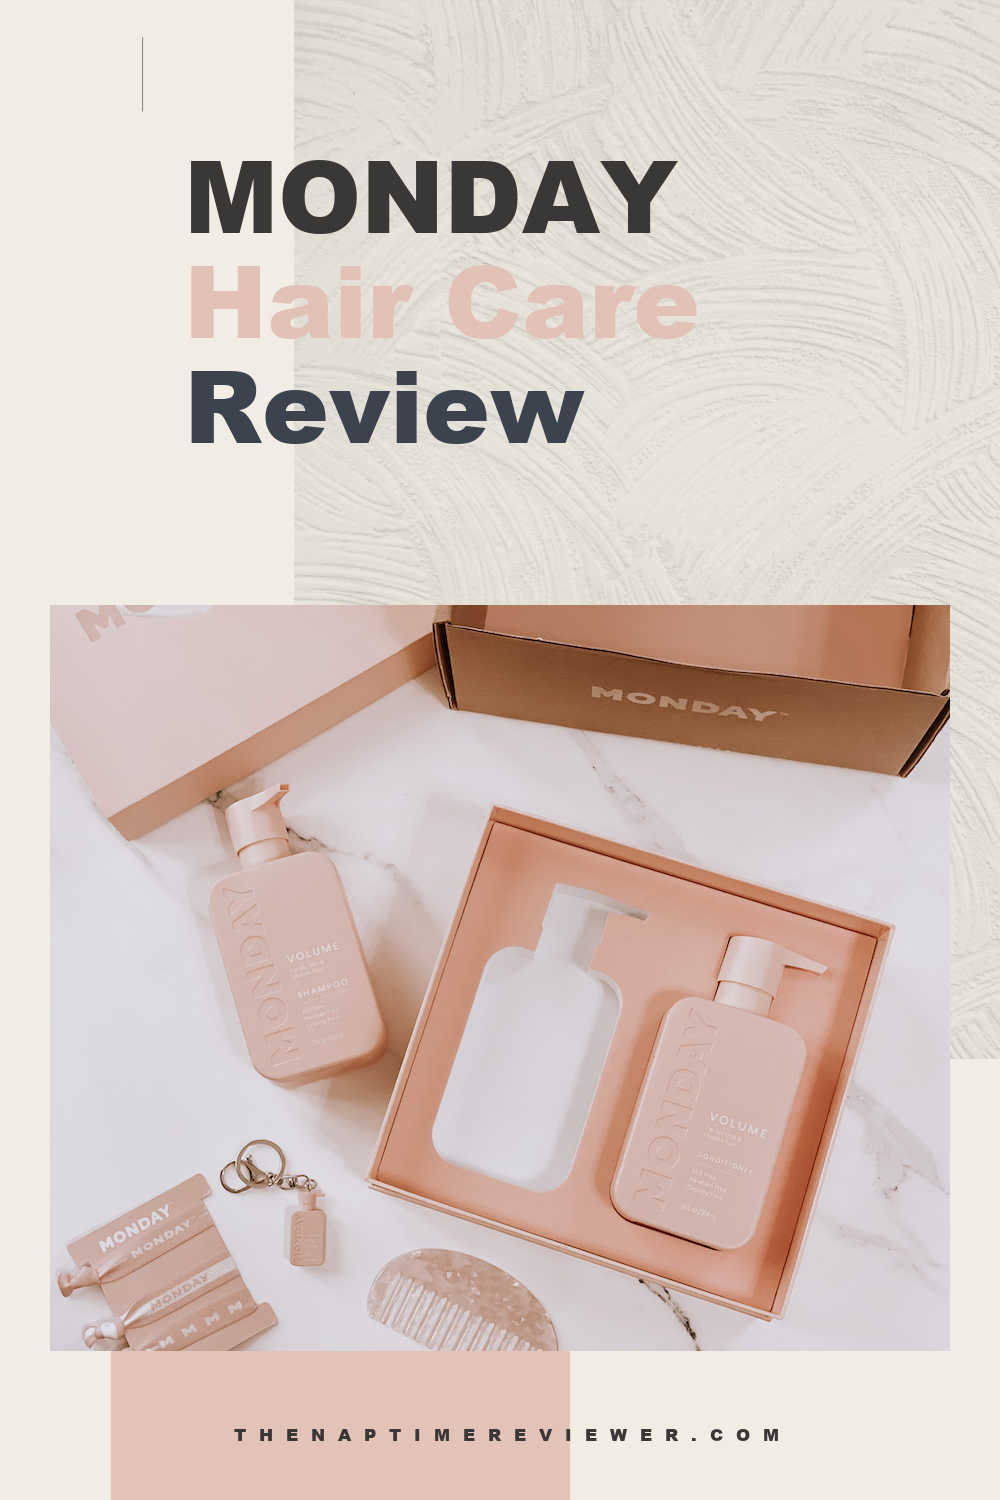 MONDAY Hair Care Review